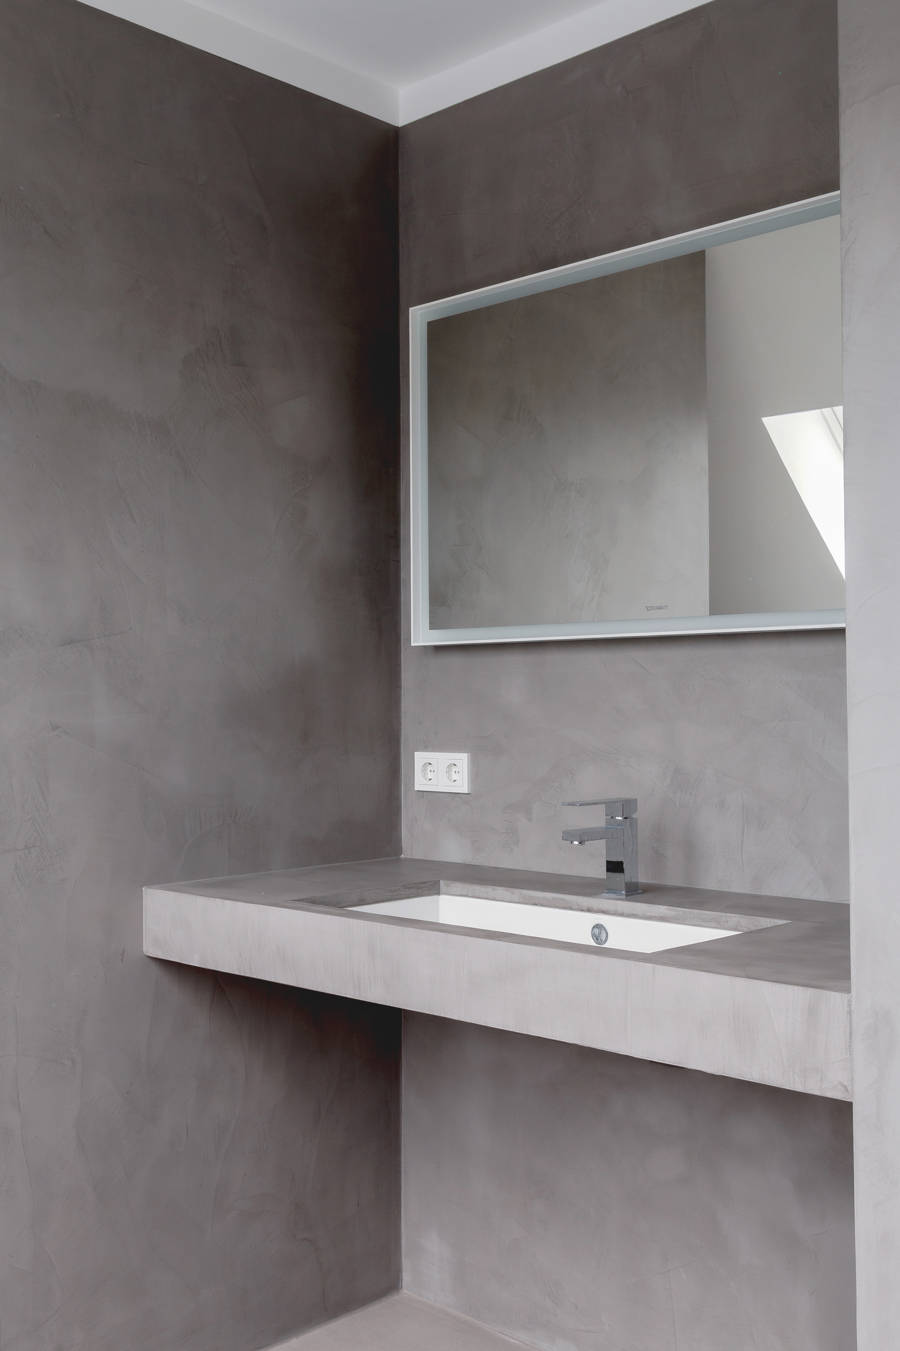 Bathroom with grey microcement on the walls, the floor and the countertop.